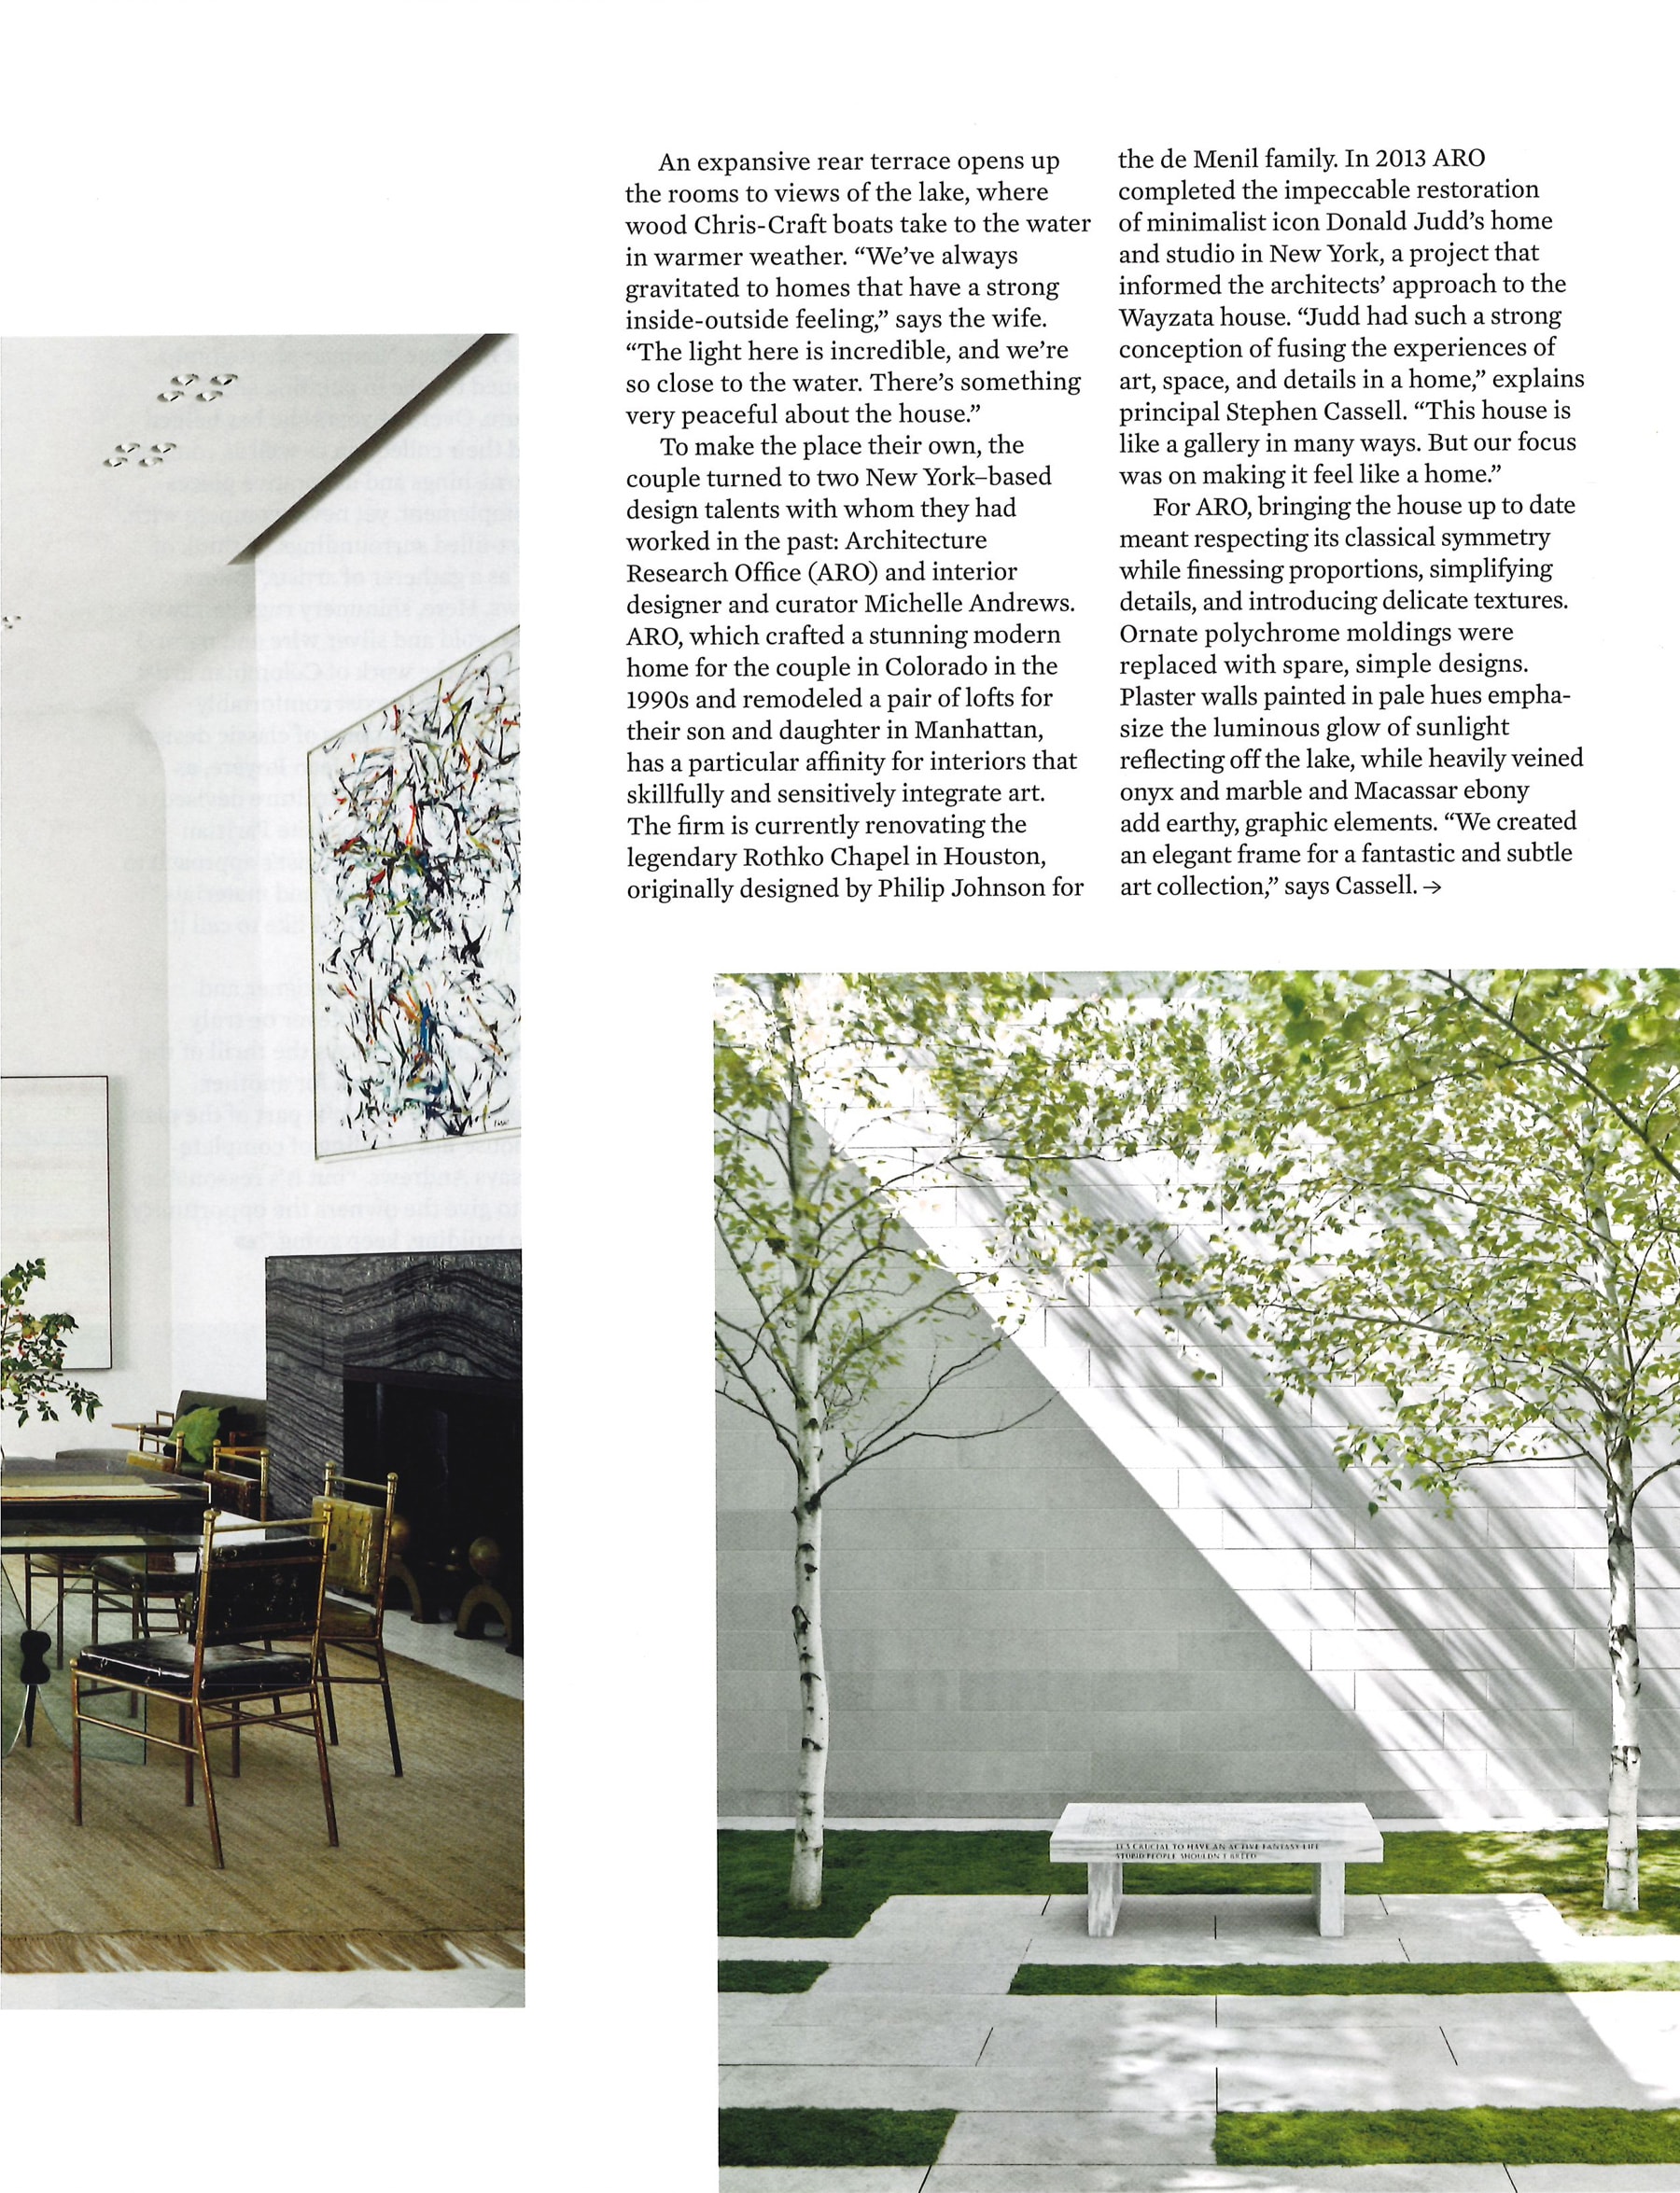 Architectural Digest Article